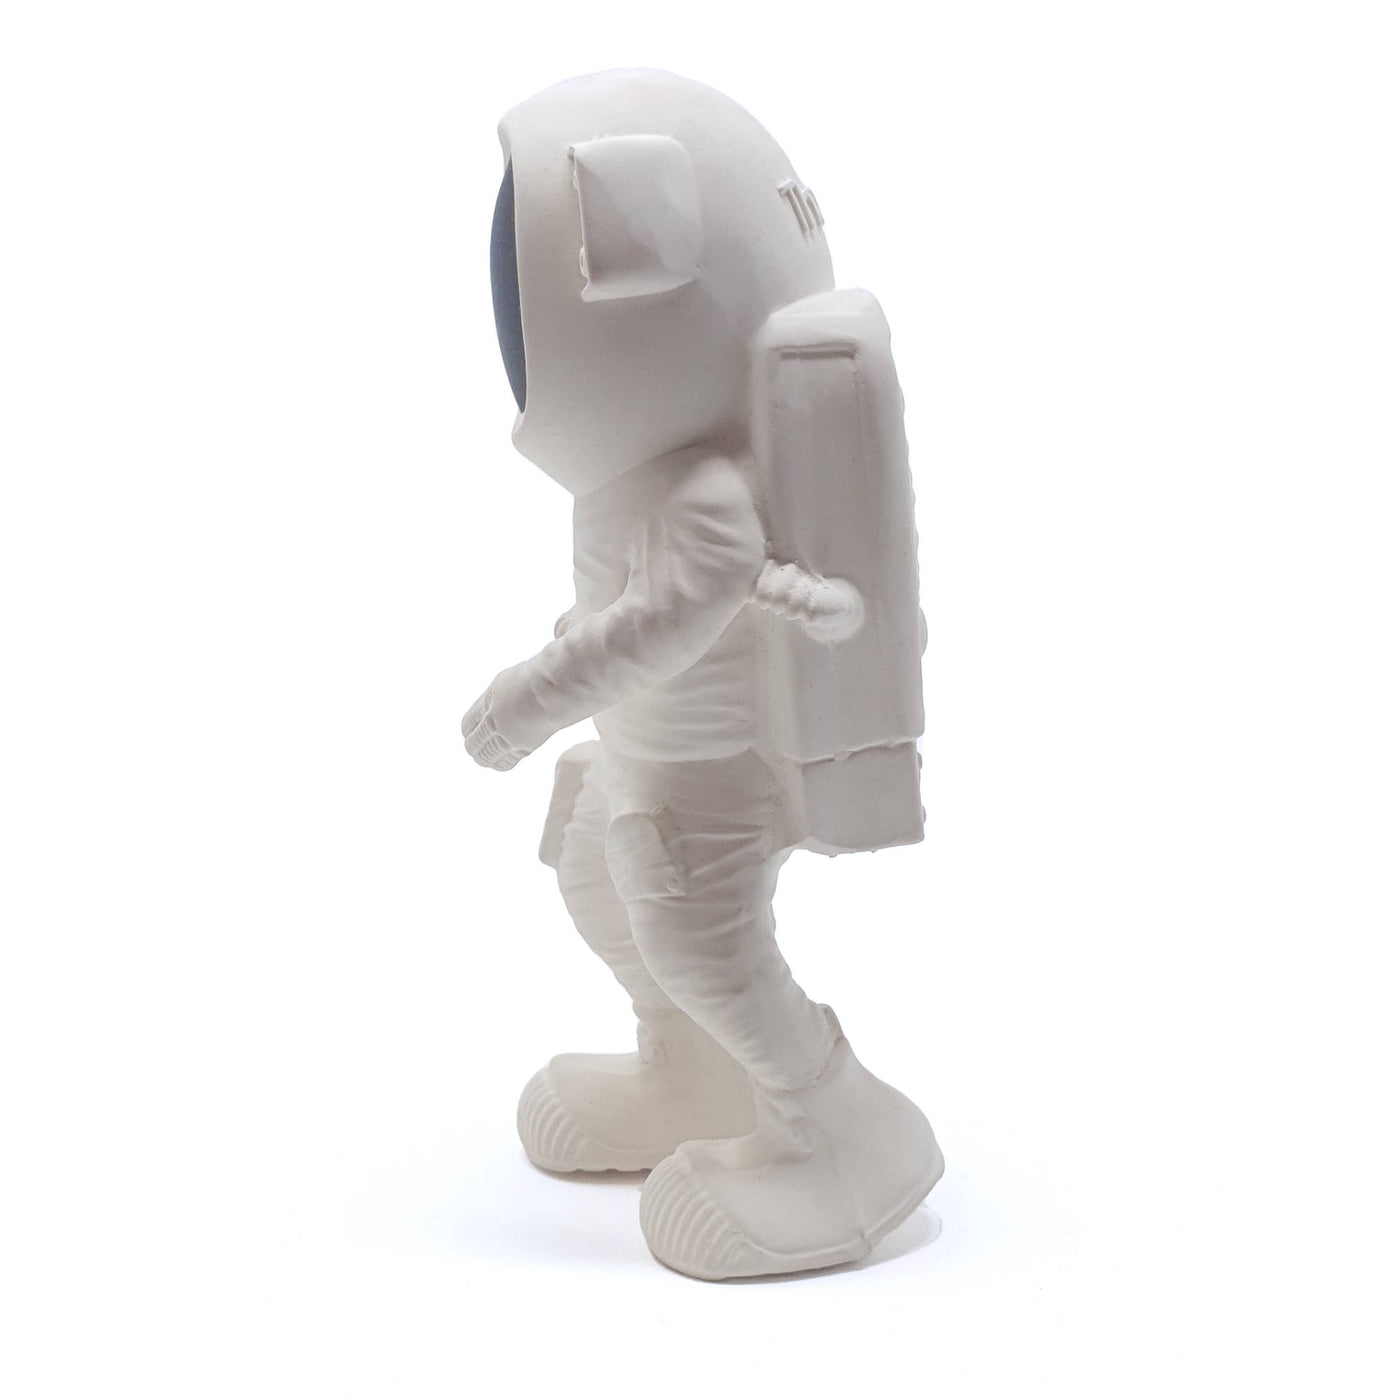 AstroGNAW natural rubber astronaut shaped teether toy 